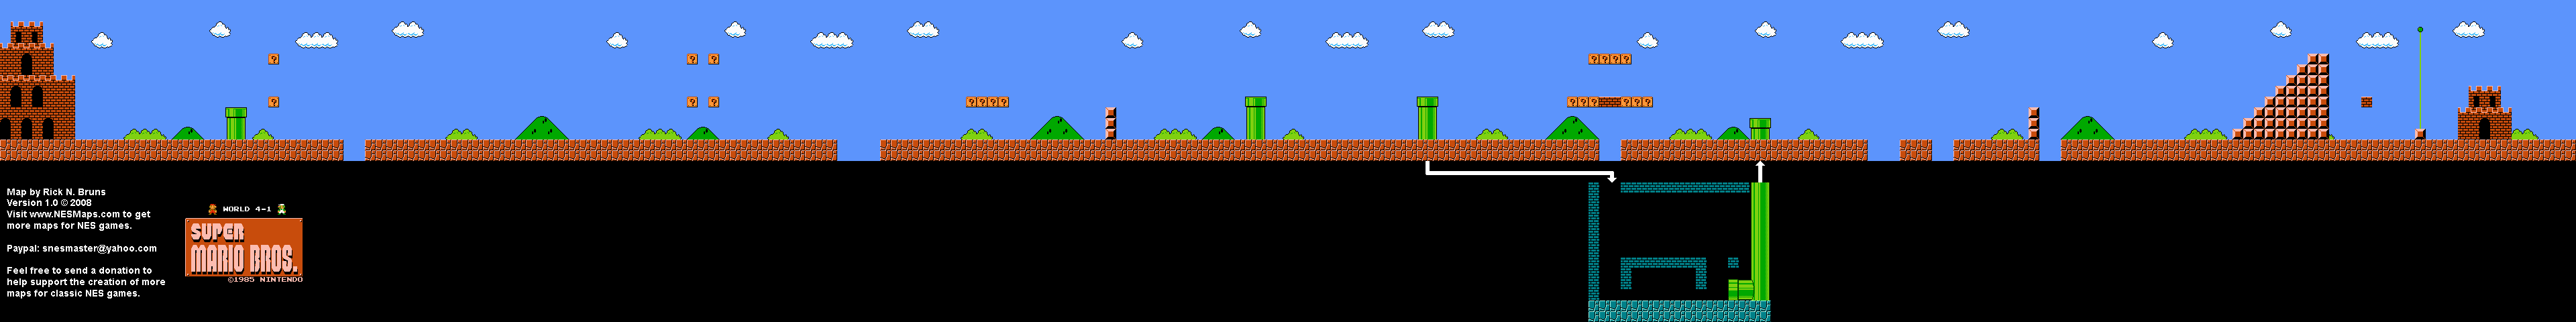 Super Mario Brothers - World 4-1 Nintendo NES Background Only Map